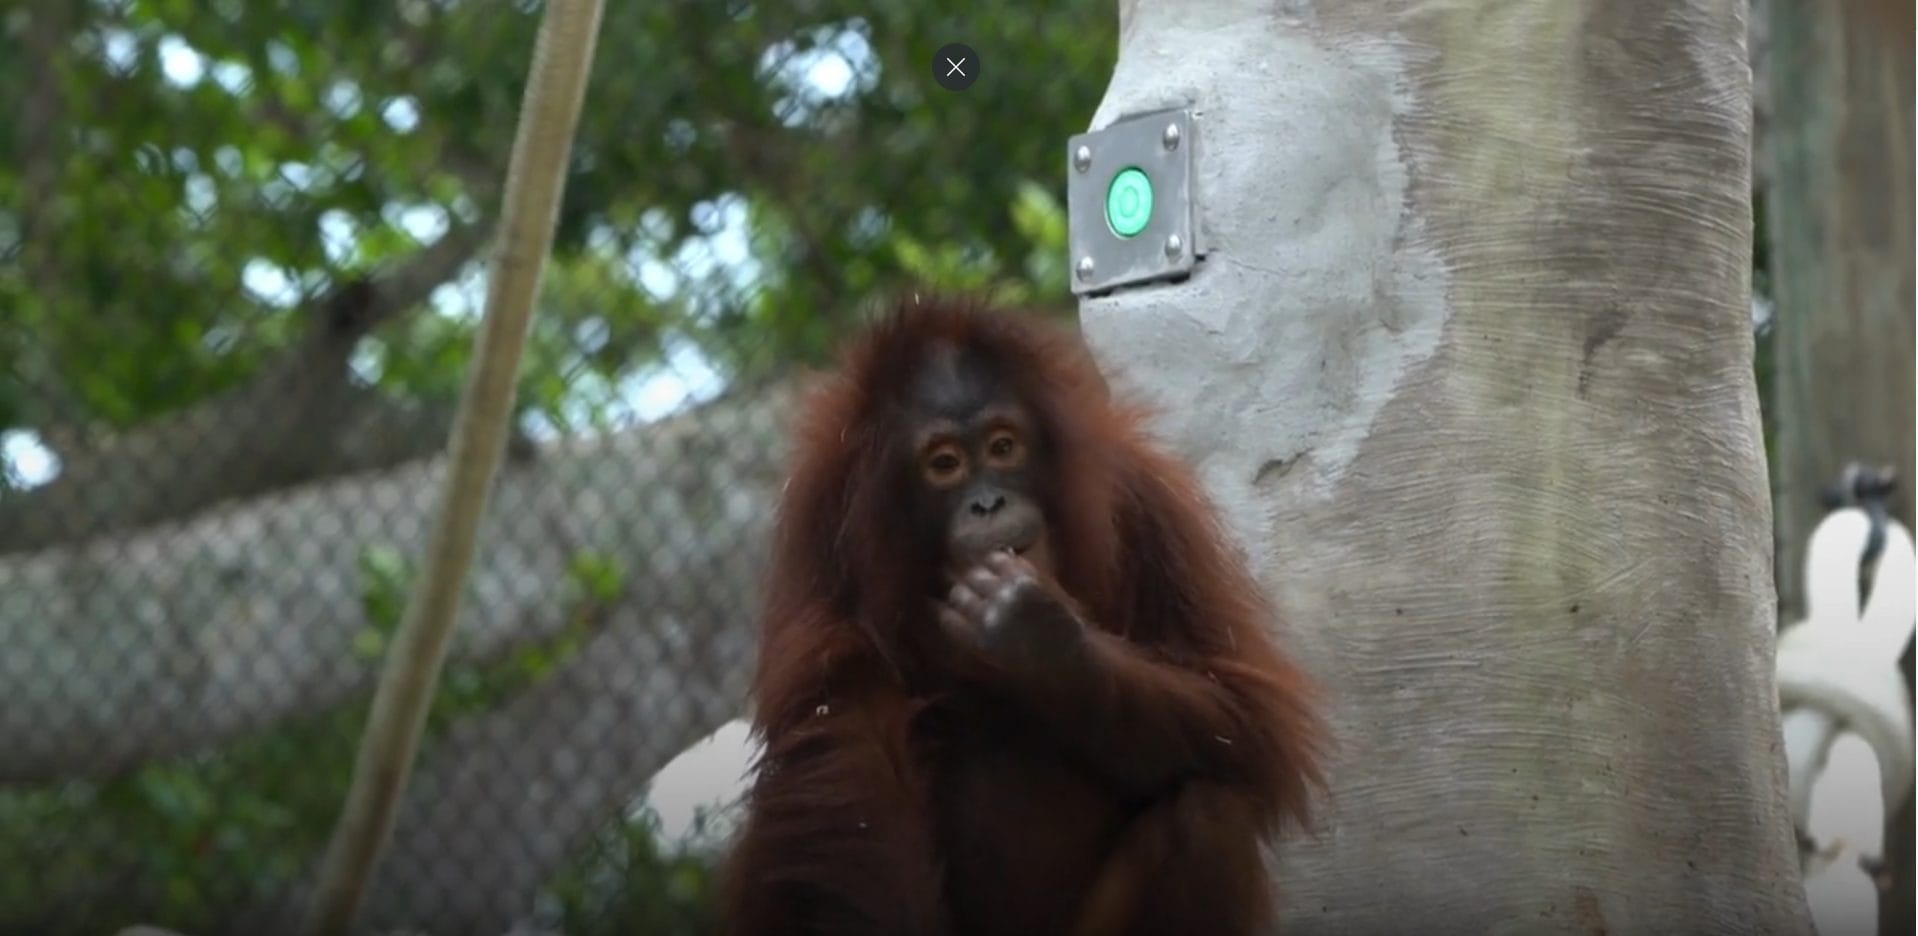 A photo of the button tucked into a tree inside the Orangutan enclosure that activates the splash zone at the Naples Zoo, feature developed by Interactive Play.